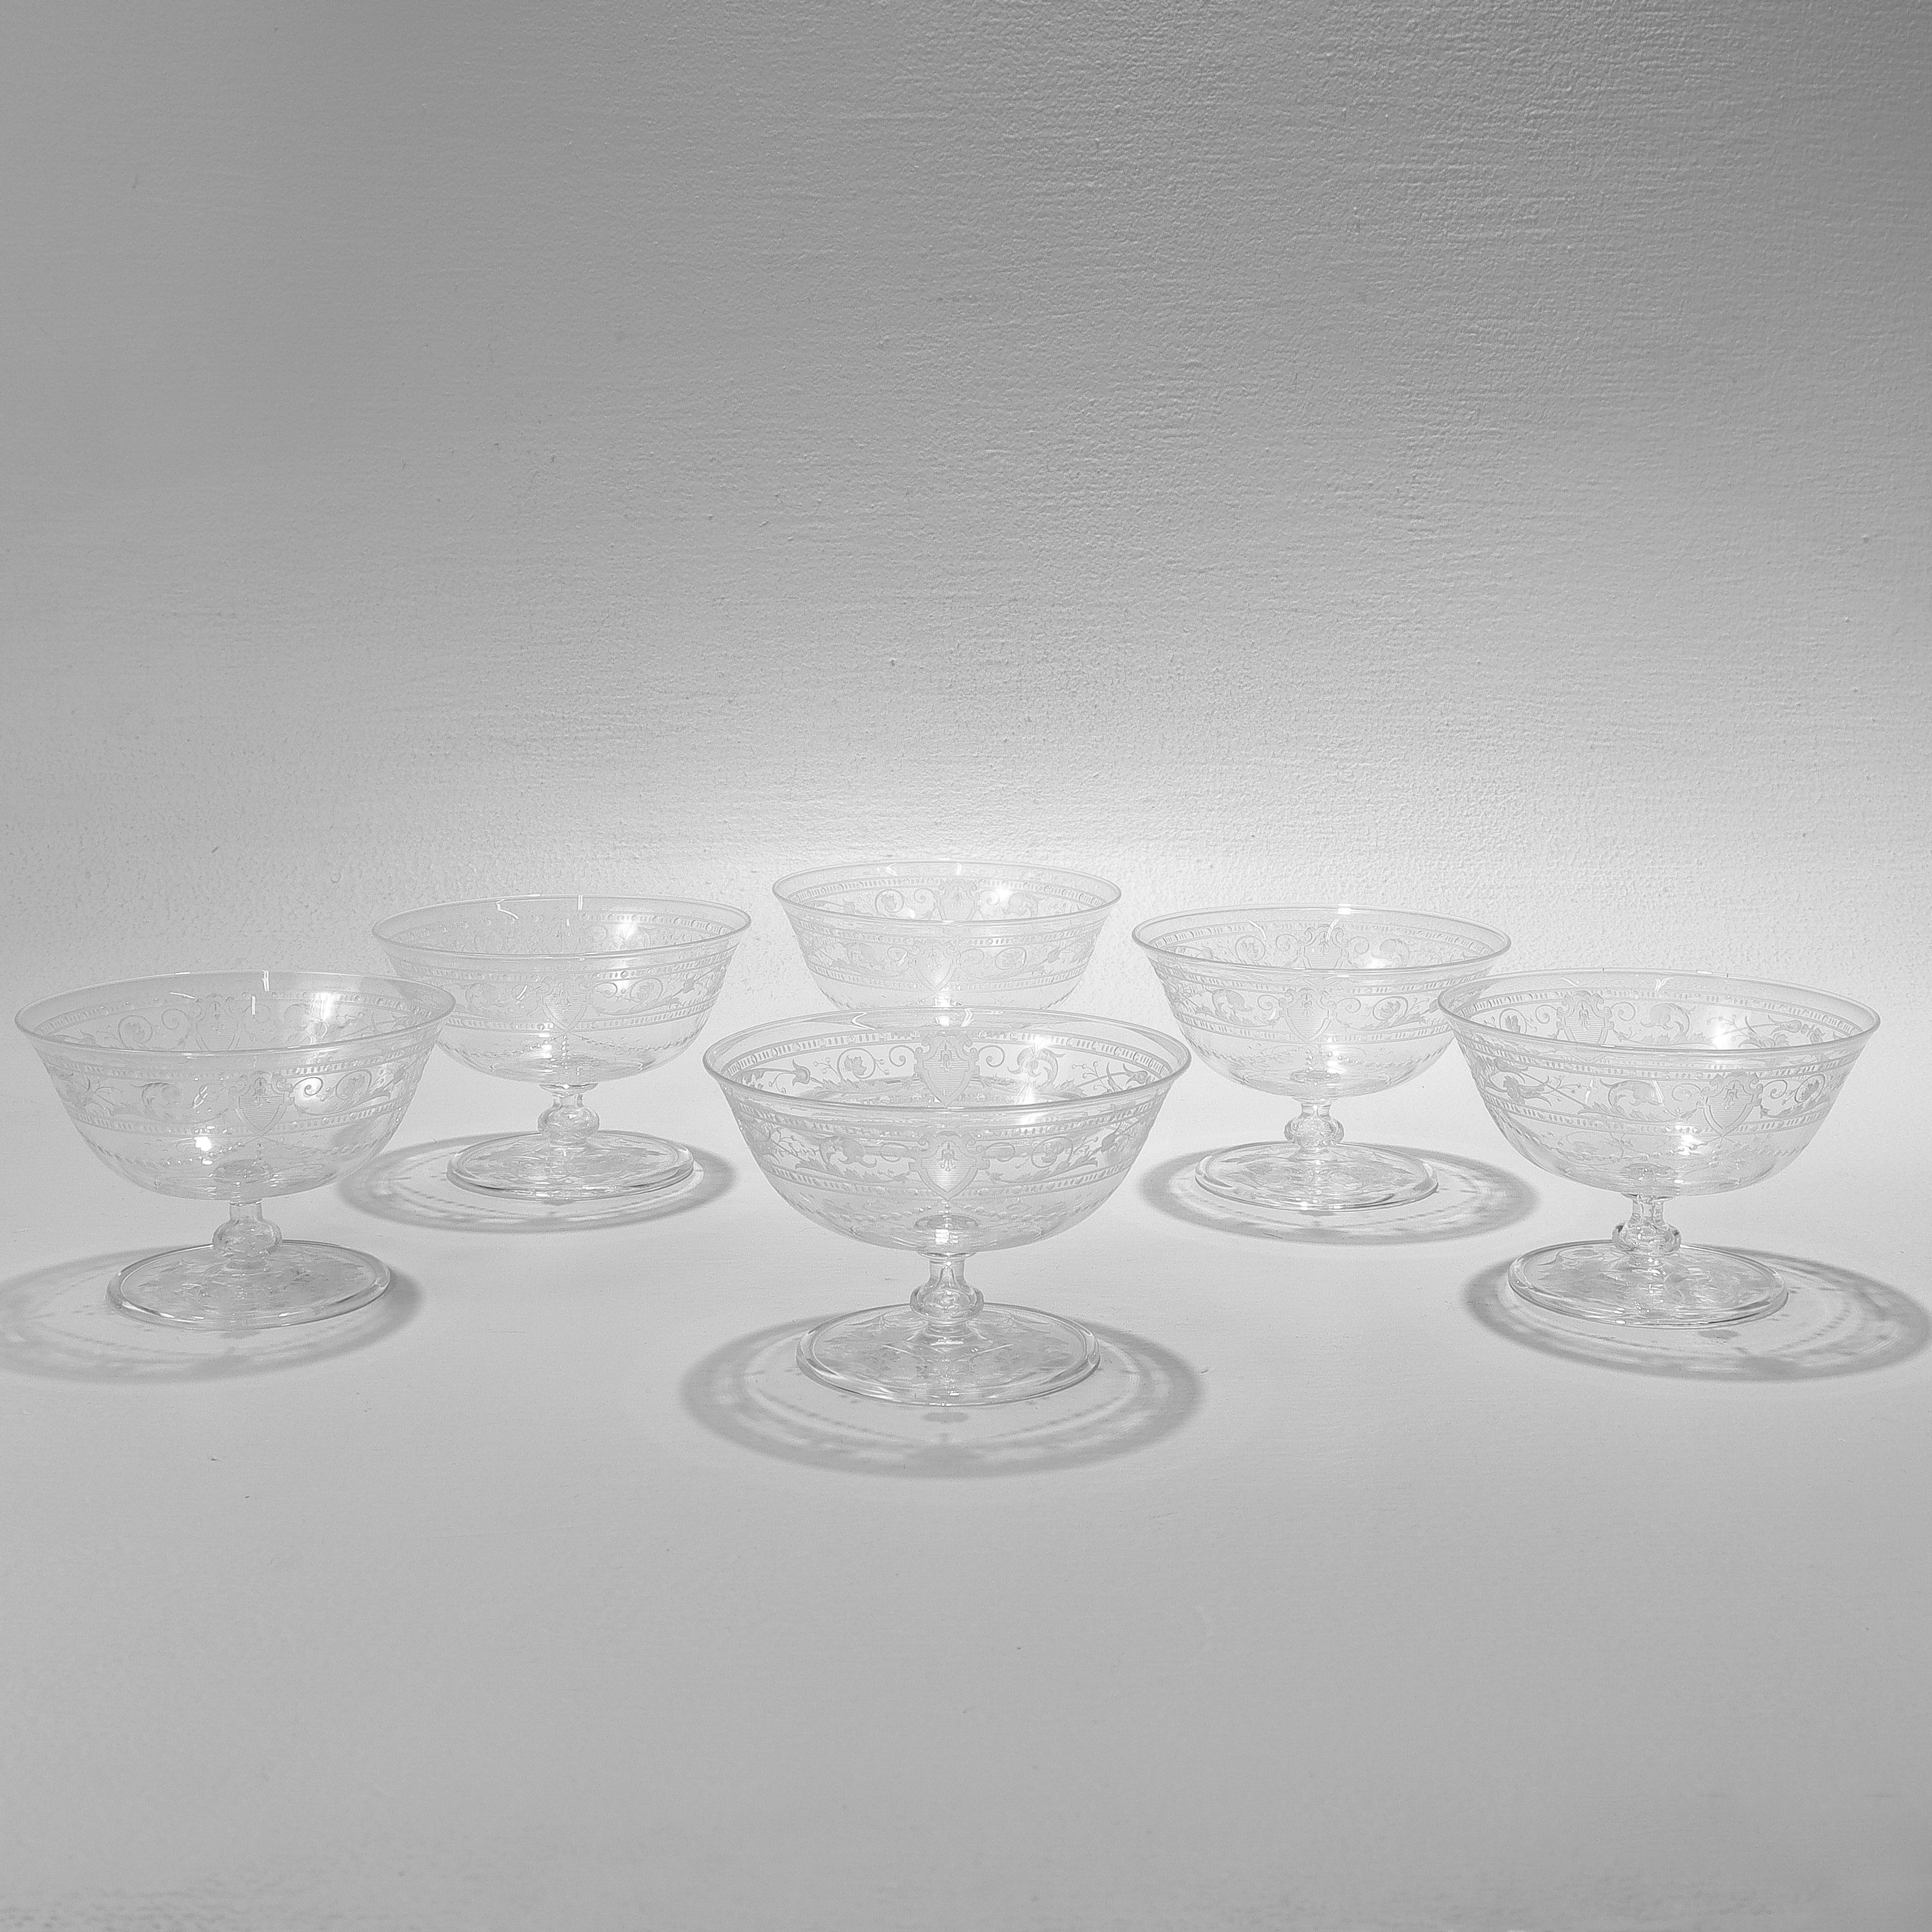 A fine set of 6 antique etched and engraved glass sherbert bowls.

Attributed to Stevens & Williams or Webb.

In the style of William Fritsche or William Kny.

With engraved & etched designs trelliswork, flowers, and shield devices.

Simply a